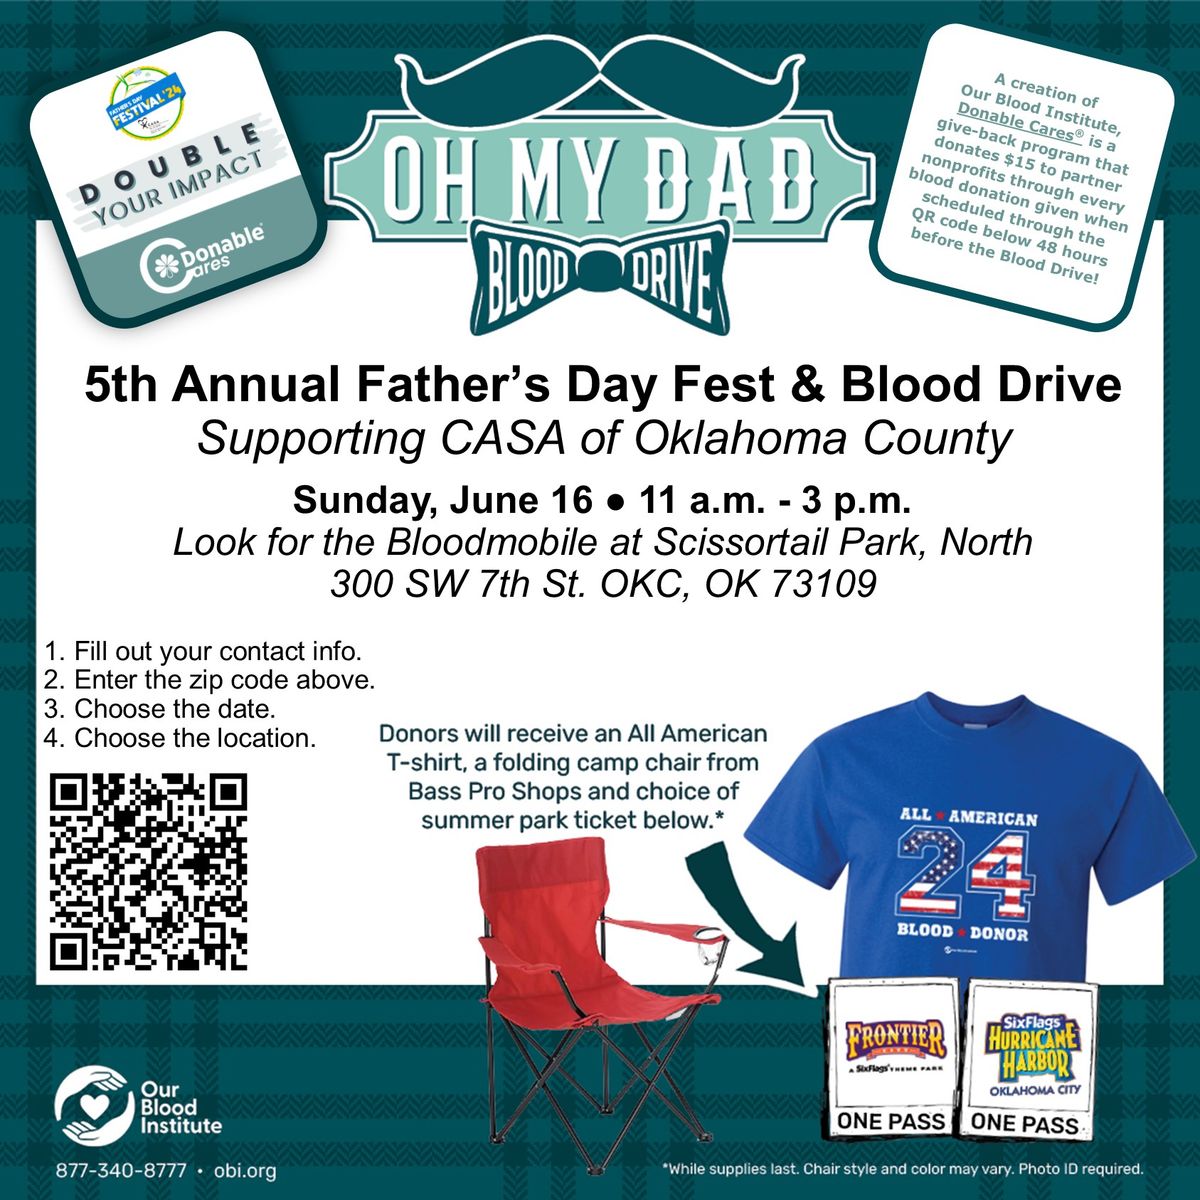 5th Annual Father's Day Fest & Blood Drive